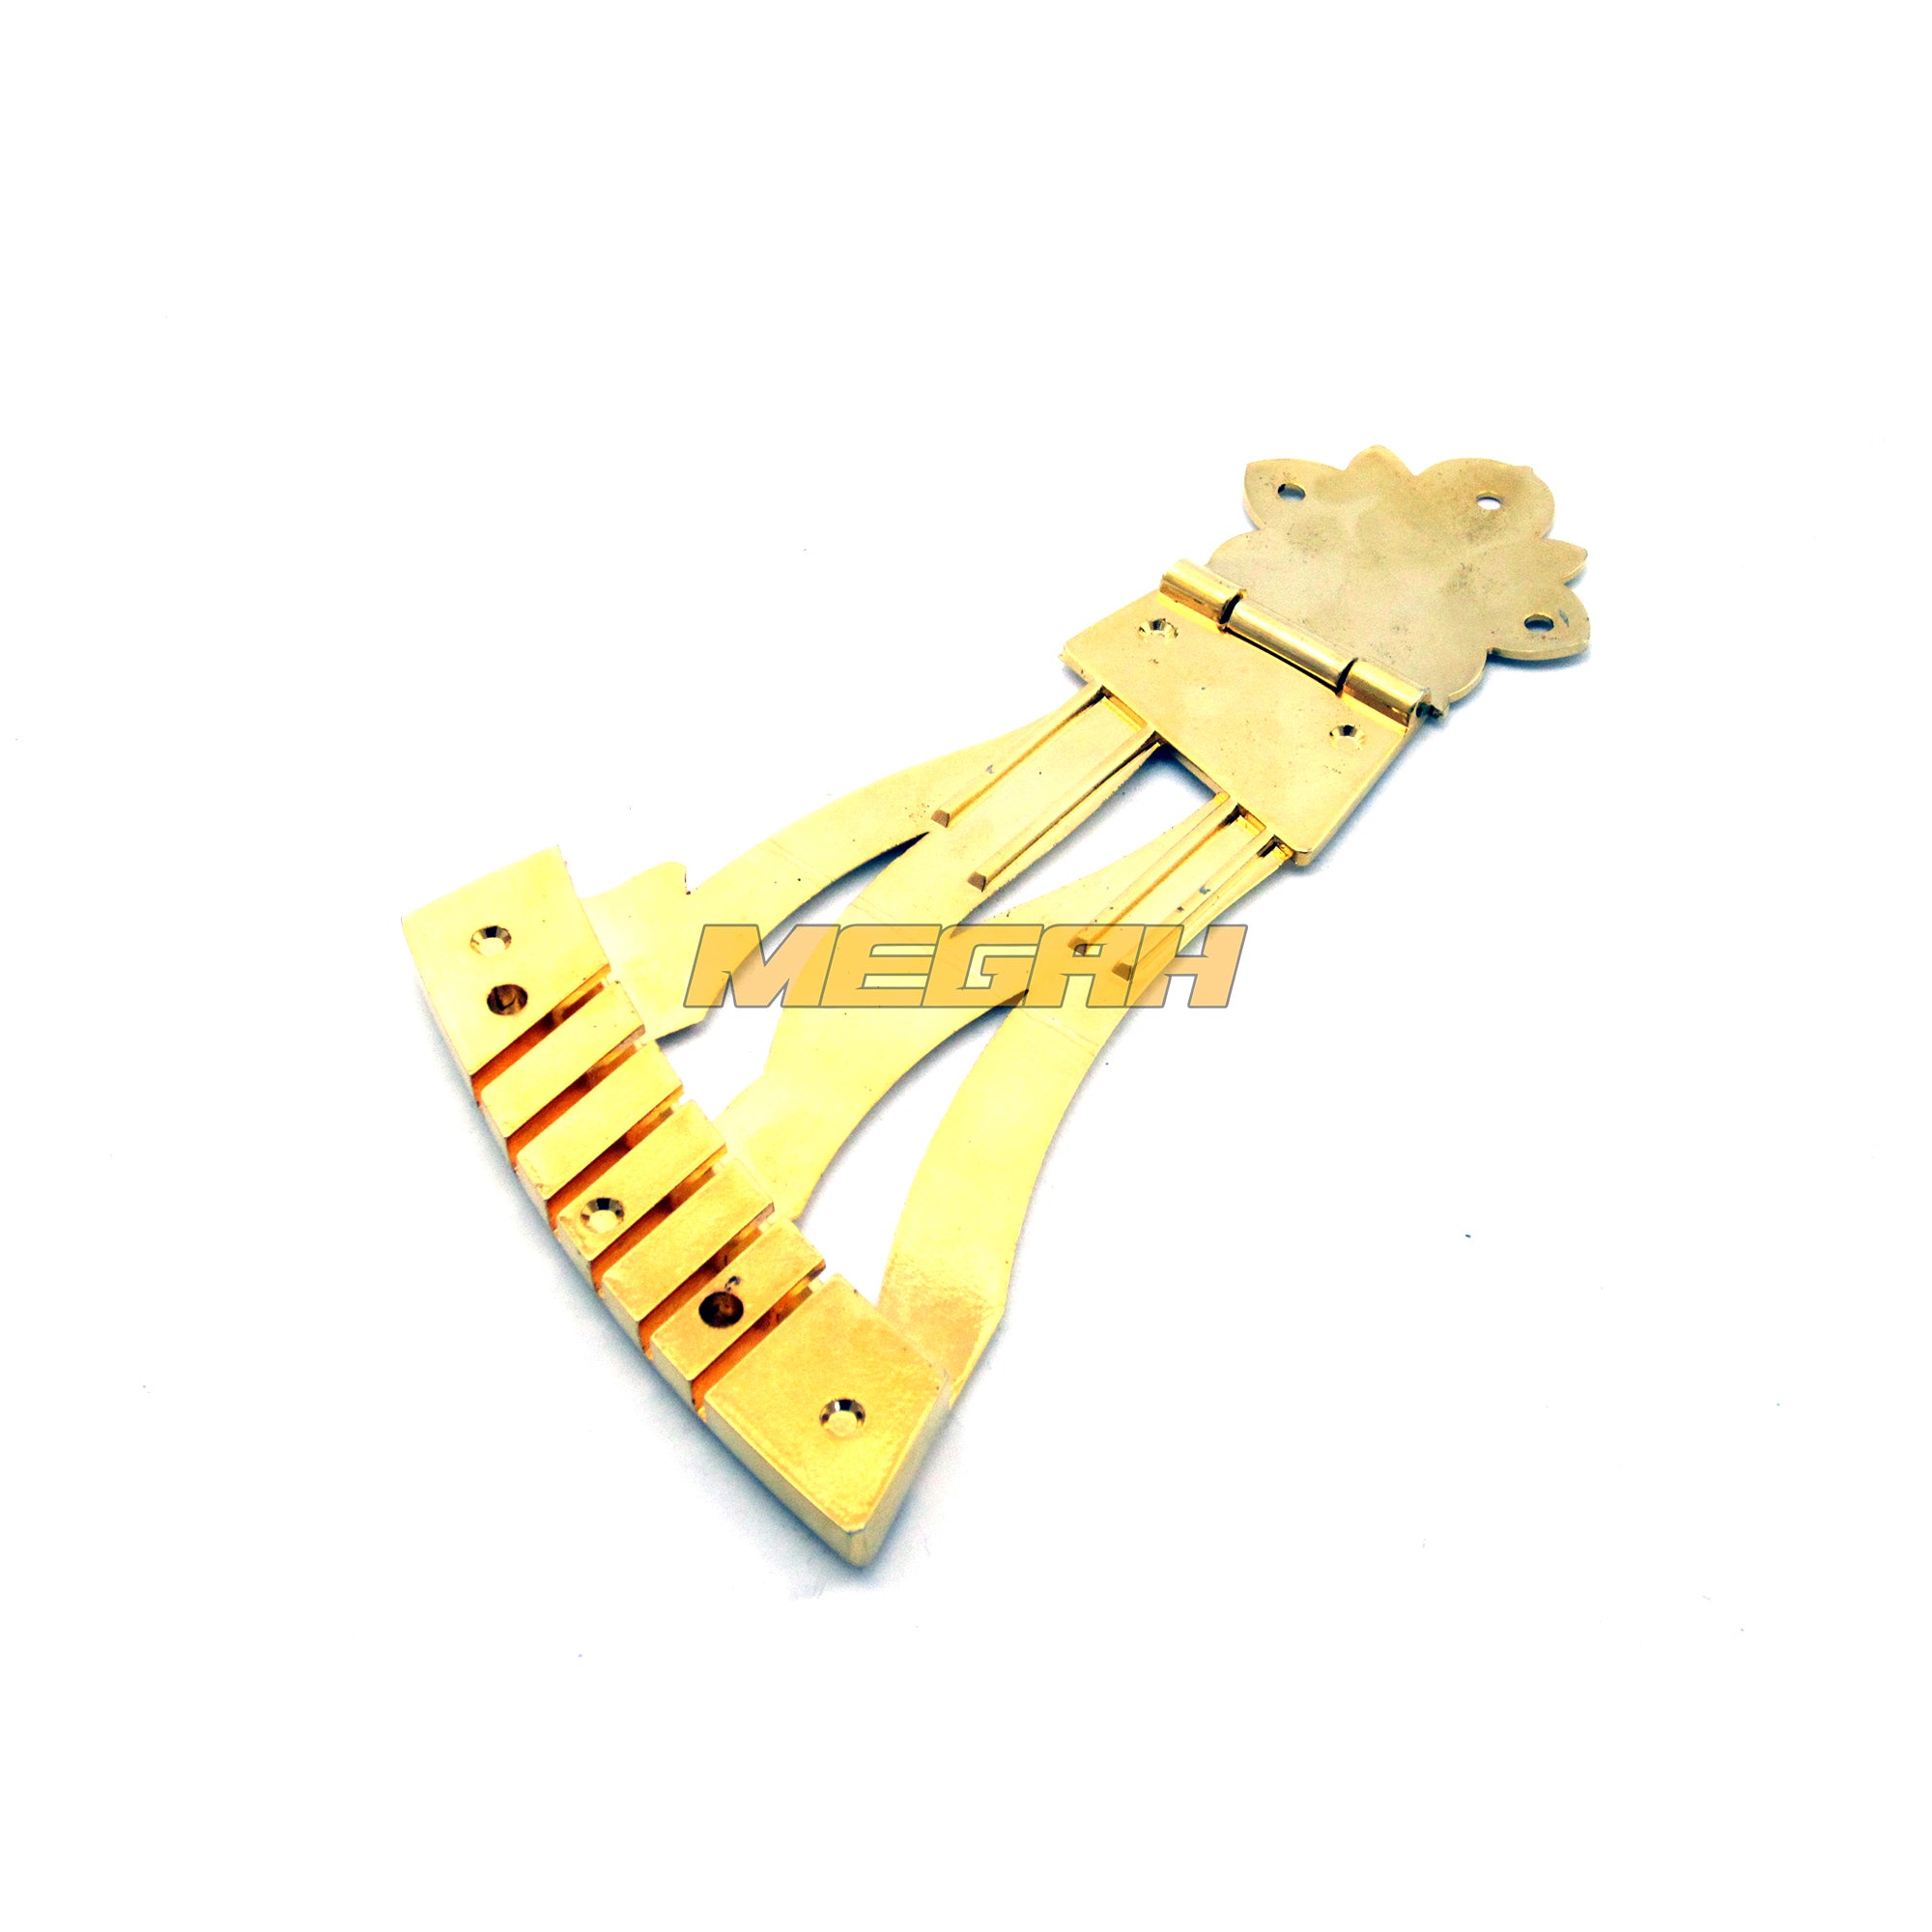 TAIL PIECE GOLD AND CHROME MDL W AG075 - Megah Sport